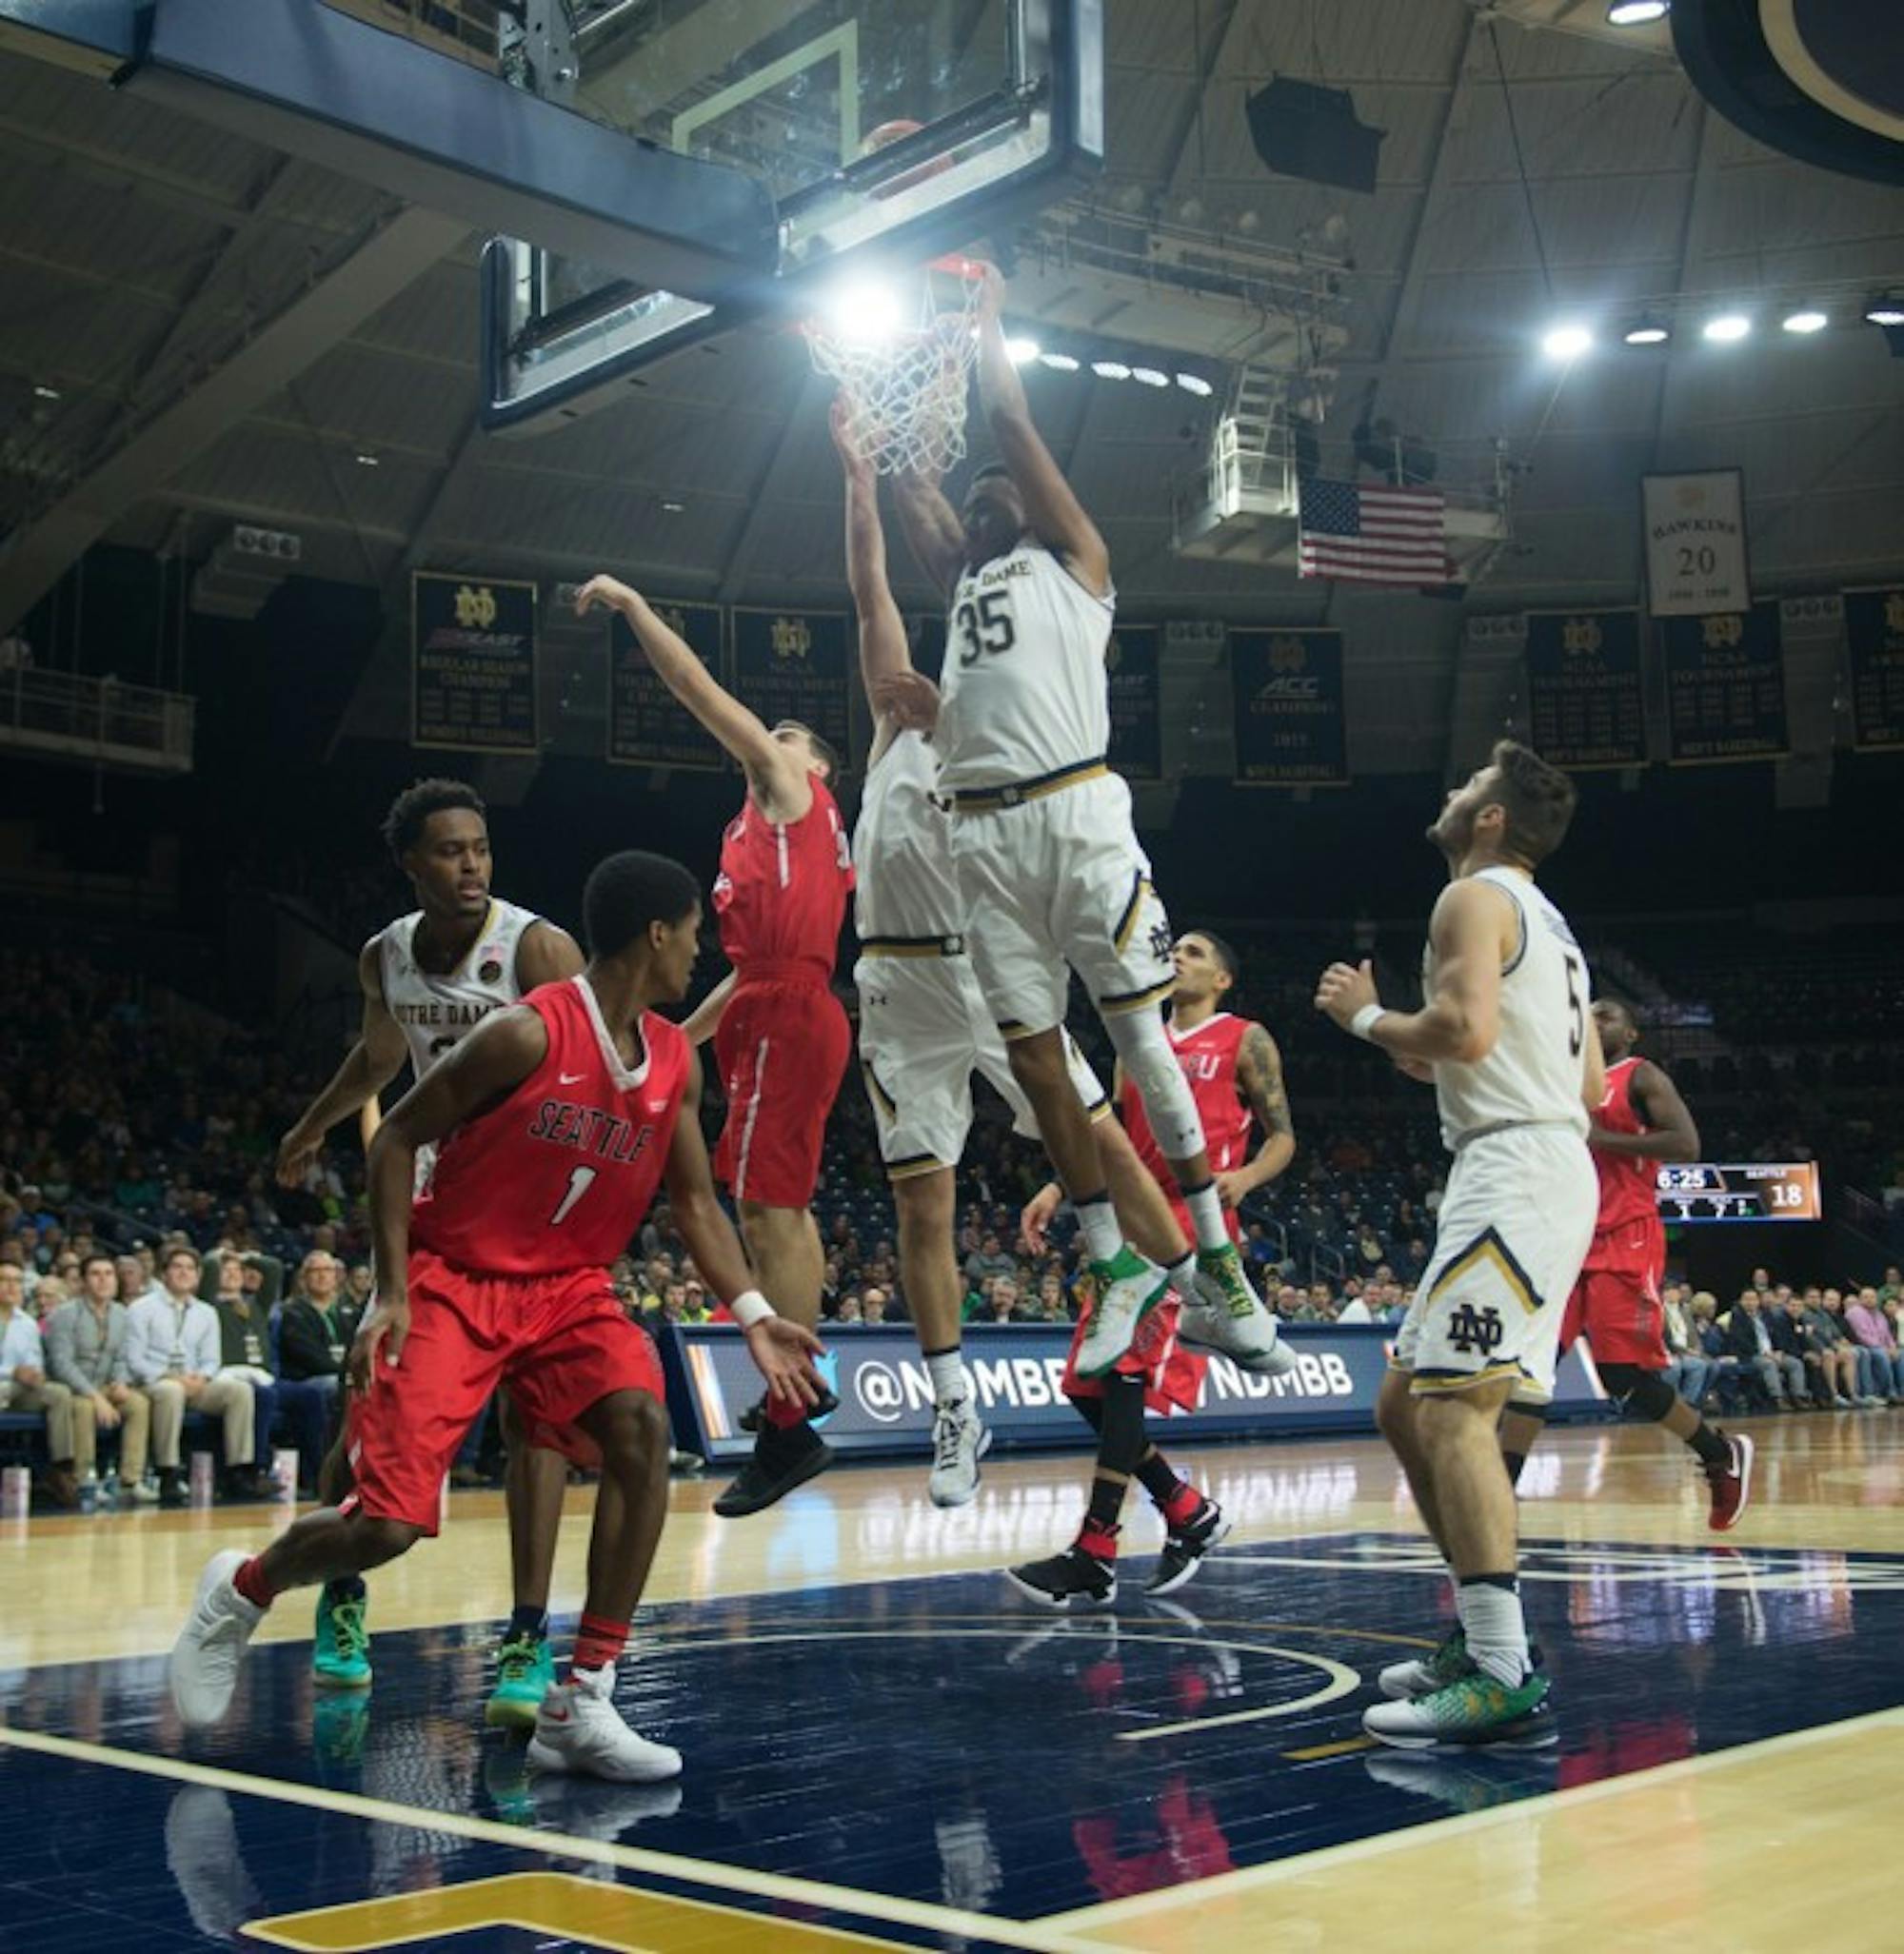 Junior captain Bonzie Colson goes up for the put-back dunk against Seattle on Wednesday at Purcell Pavilion. Colson and fellow captain V.J. Beachem each had 16 points in the 92-49 Irish win.